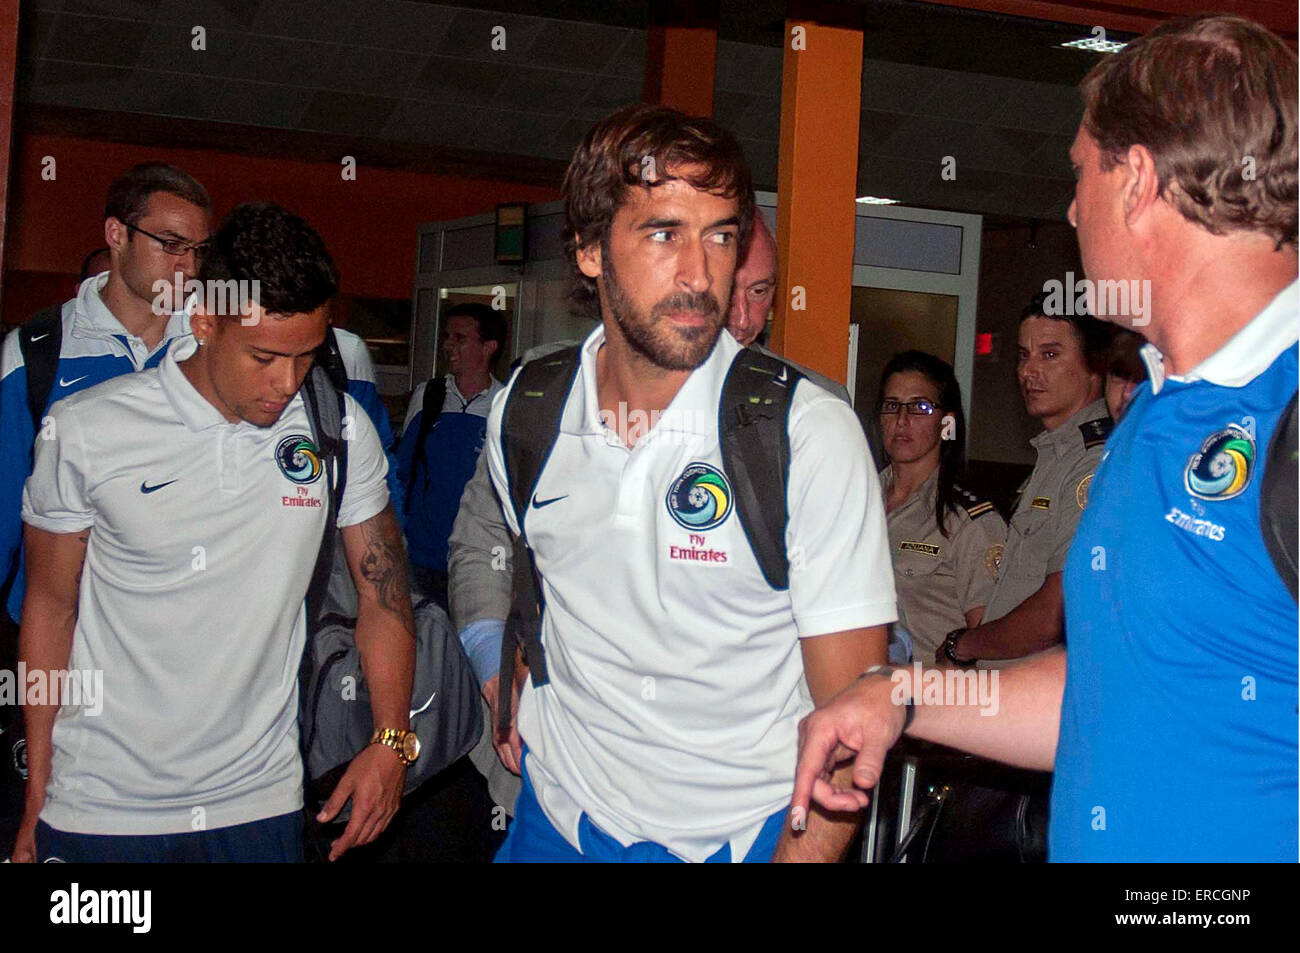 Havana. 31st May, 2015. This photo taken on May 31, 2015 shows Spanish forward Raul Gonzalez Blanco (C) arriving at the waiting room of Jose Marti International Airport, in Havana, Cuba. According to the local press, the U.S. soccer team New York Cosmos will compete with Cuba's National Team on Tuesday in a friendly match at the Pedro Marrero Stadium. © Jose Tito Merino/Prensa Latina/Xinhua/Alamy Live News Stock Photo